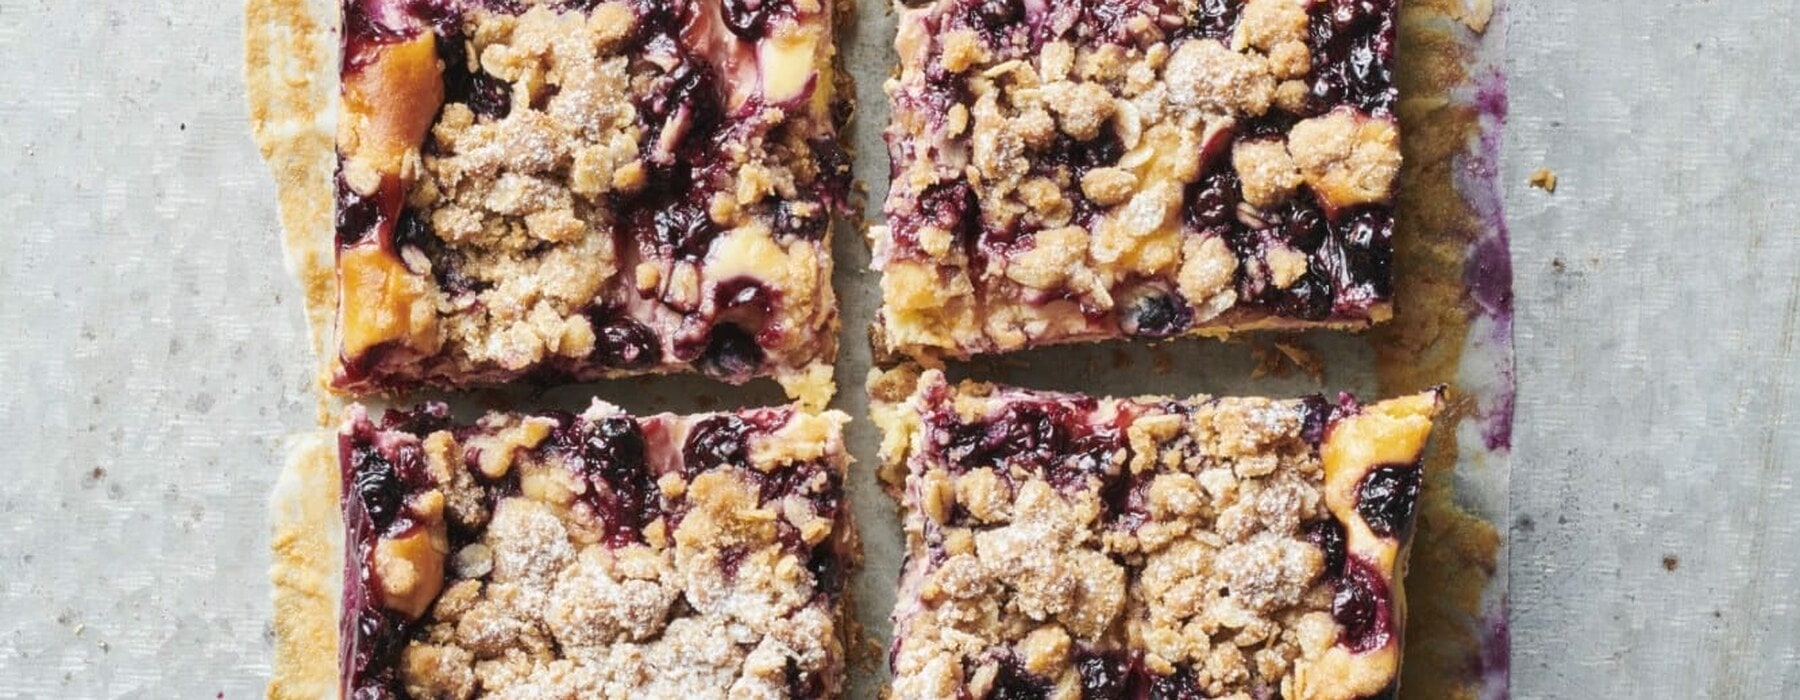 Blueberry Cheesecake and Oatmeal Streusel Slice_Dish Sweet